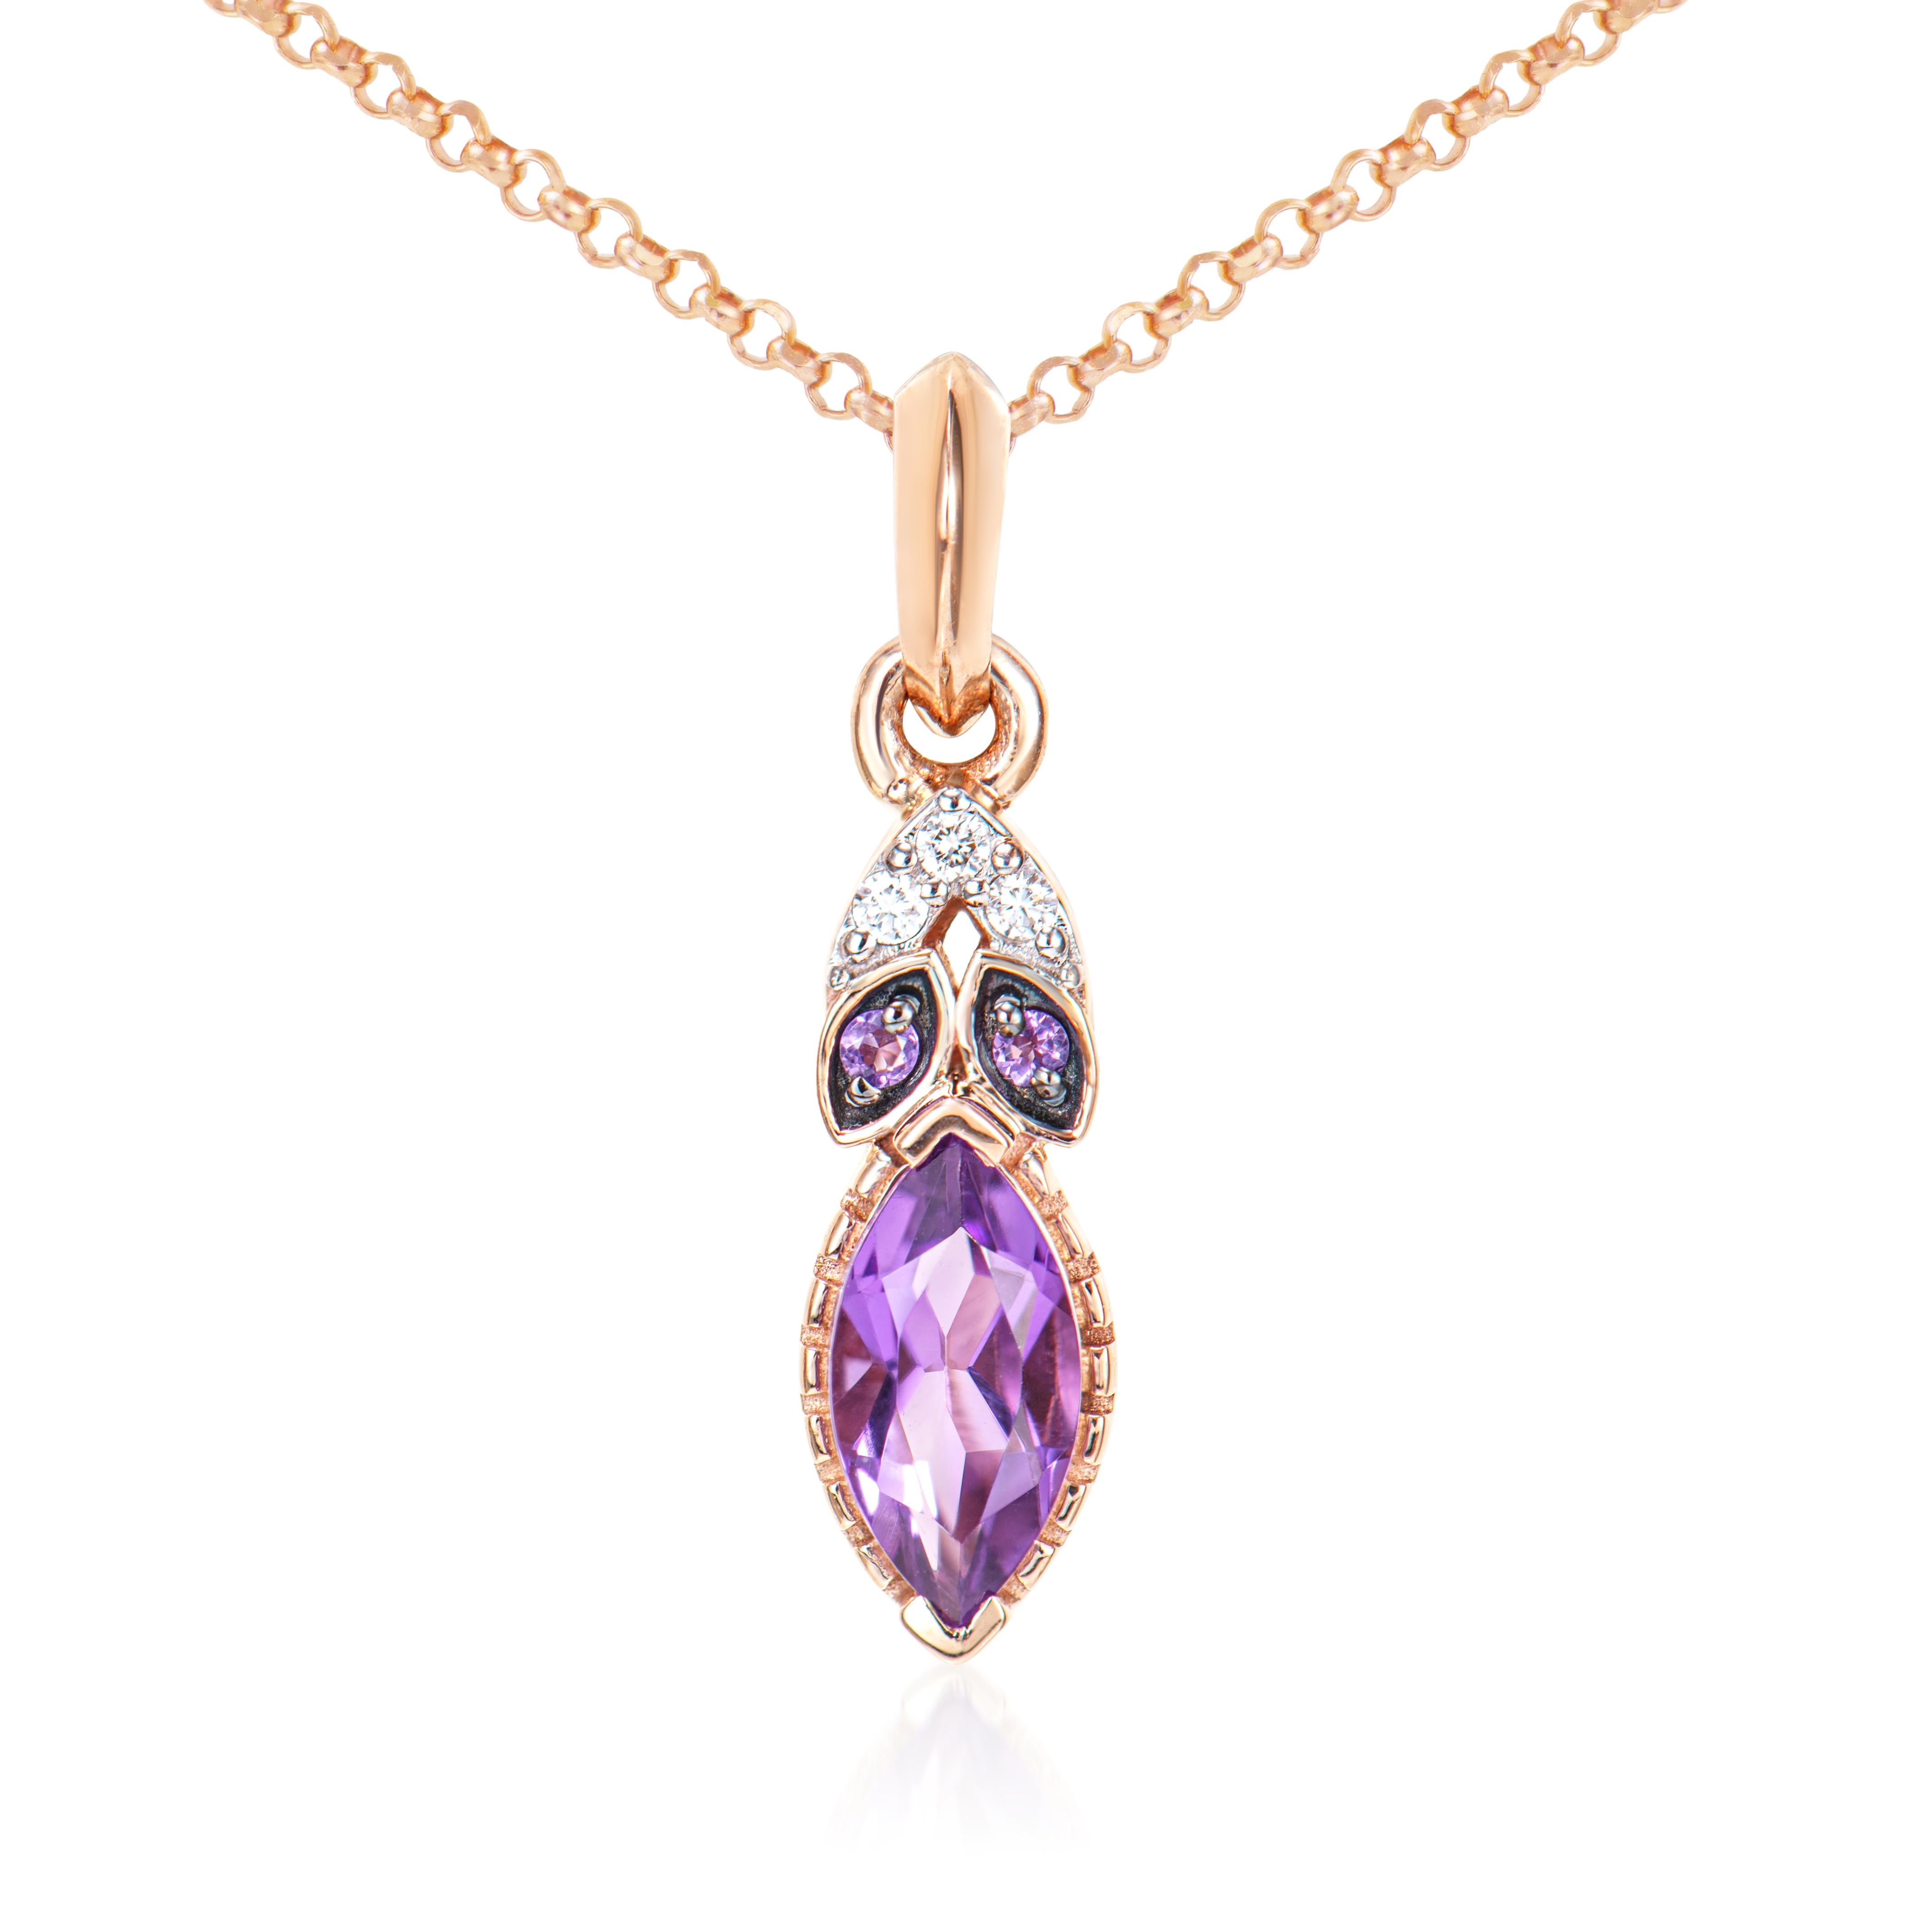 Contemporary 0.45 Carat Amethyst Pendant in 14Karat Rose Gold with White Diamond. For Sale